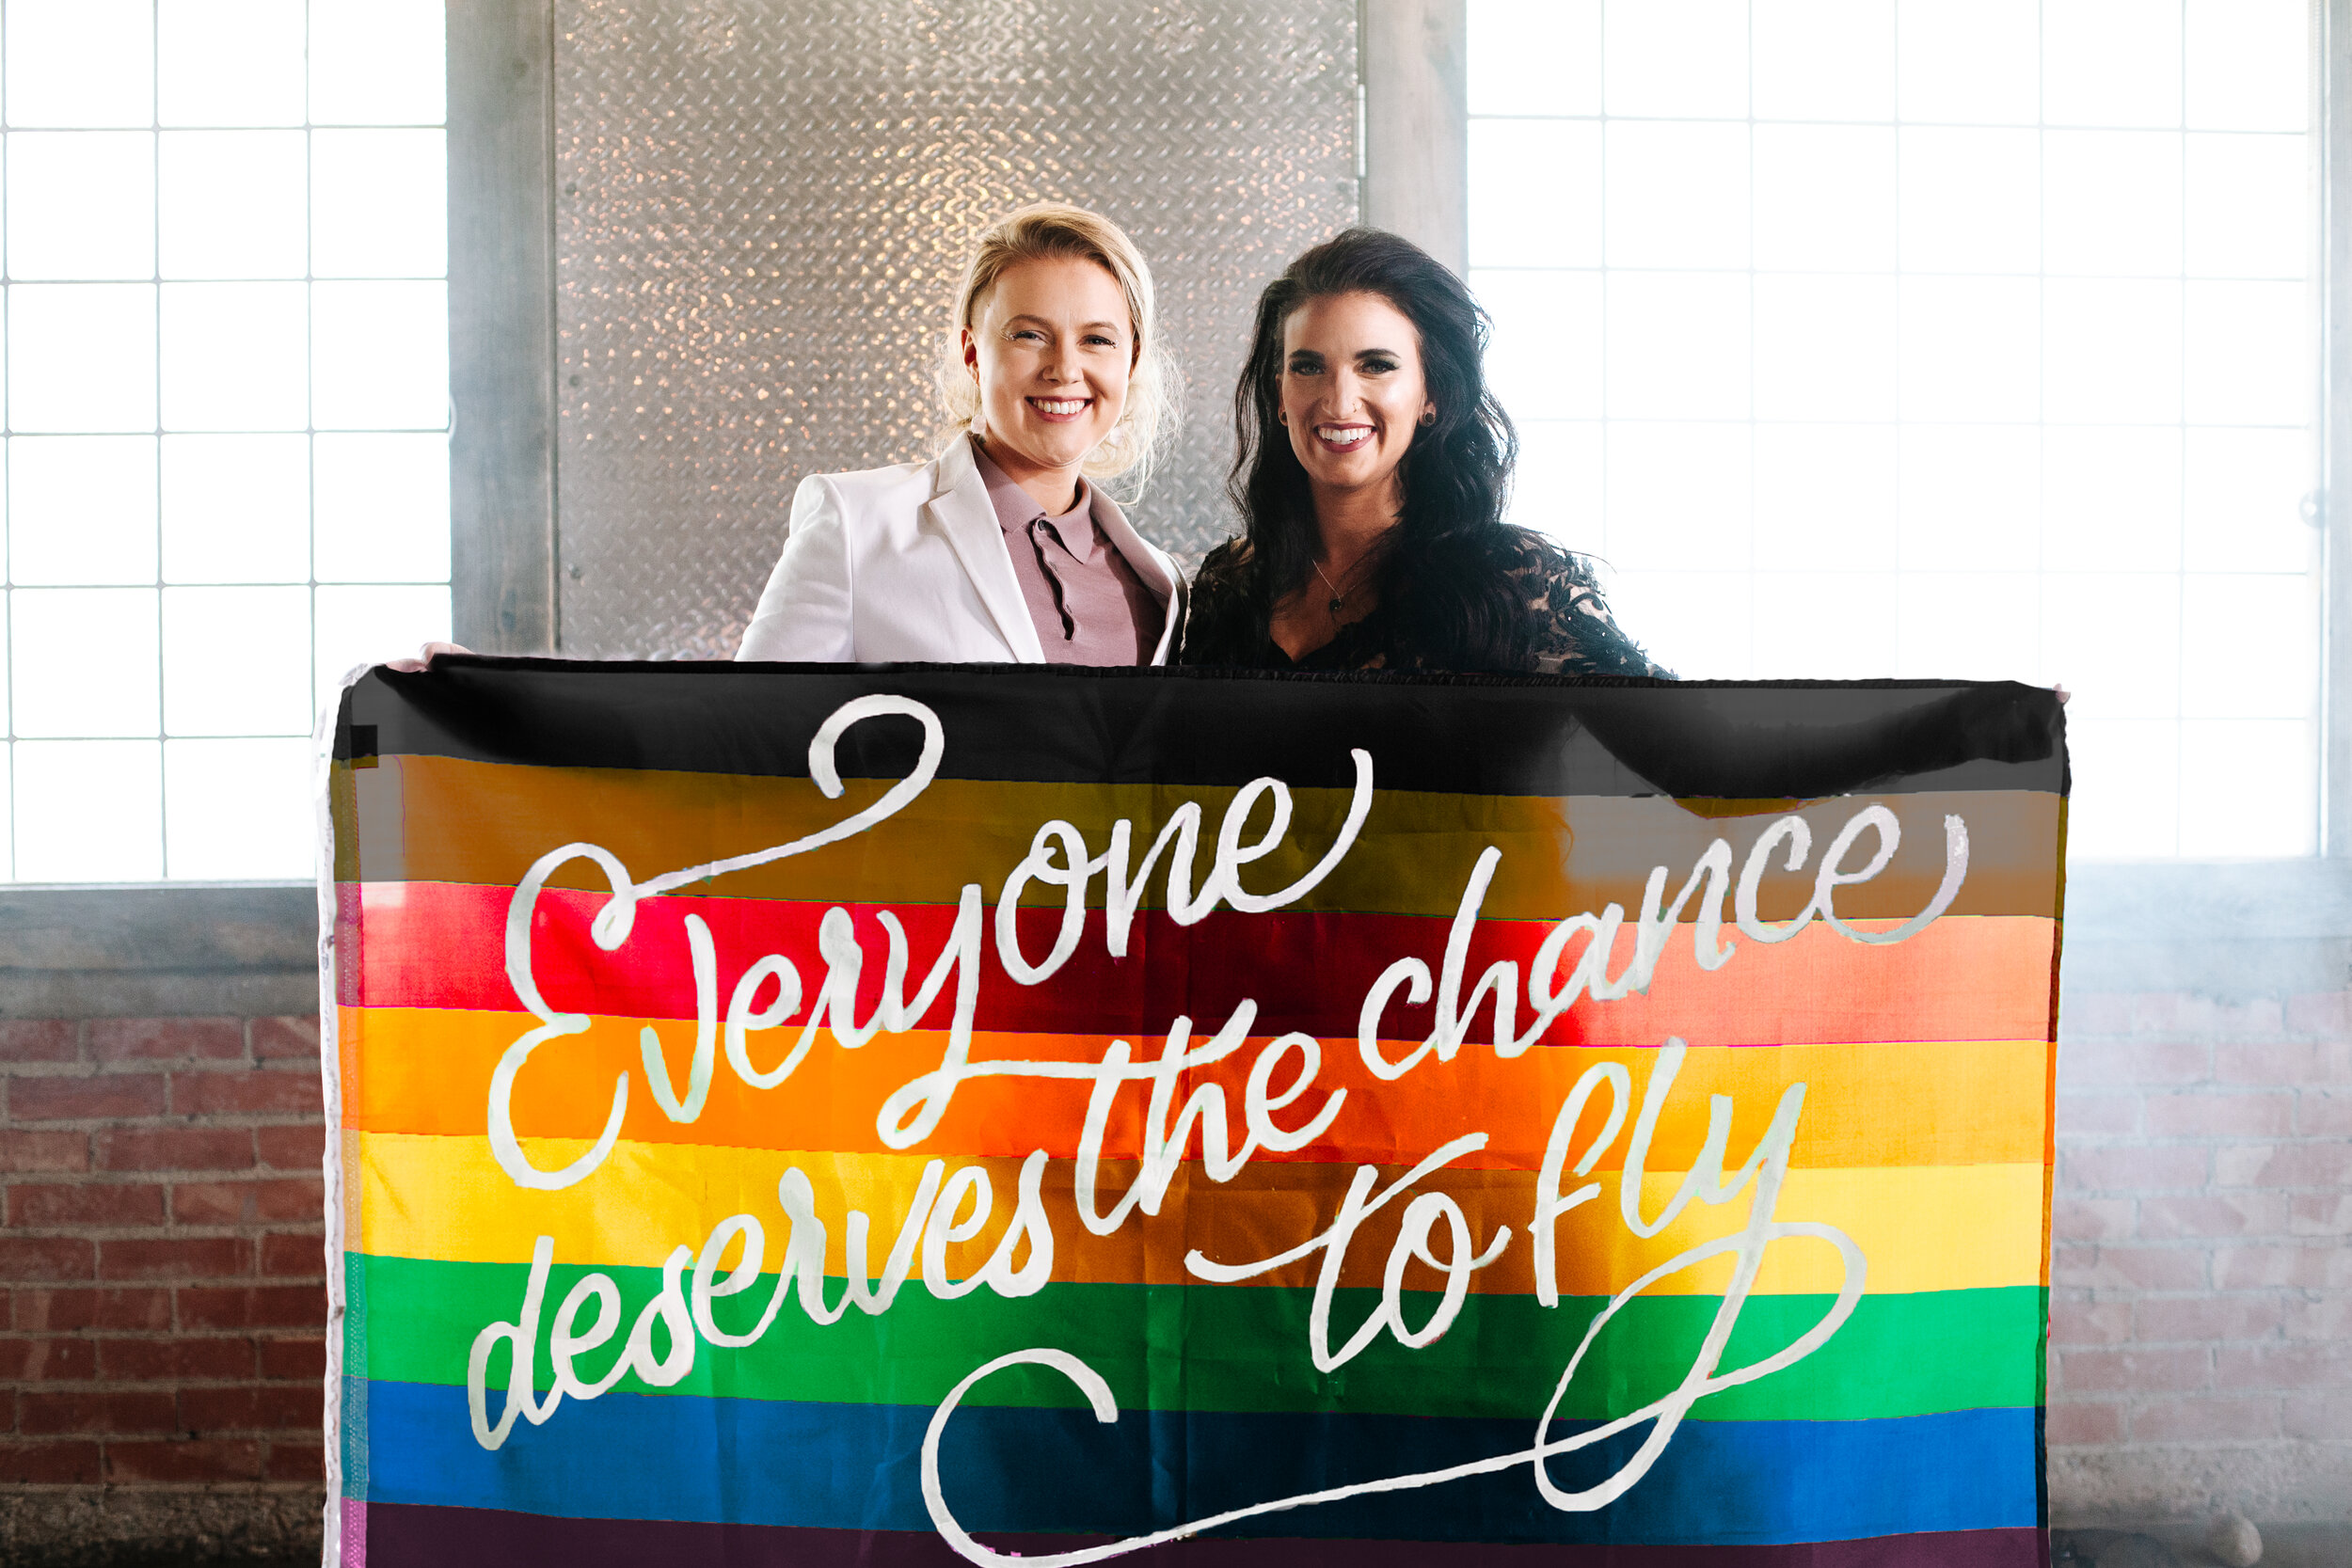 Lesbian couple looking at each other at their wedding holding a pride flag that says, "Everyone deserves the chance to fly"-a quote from the broadway play Wicked.